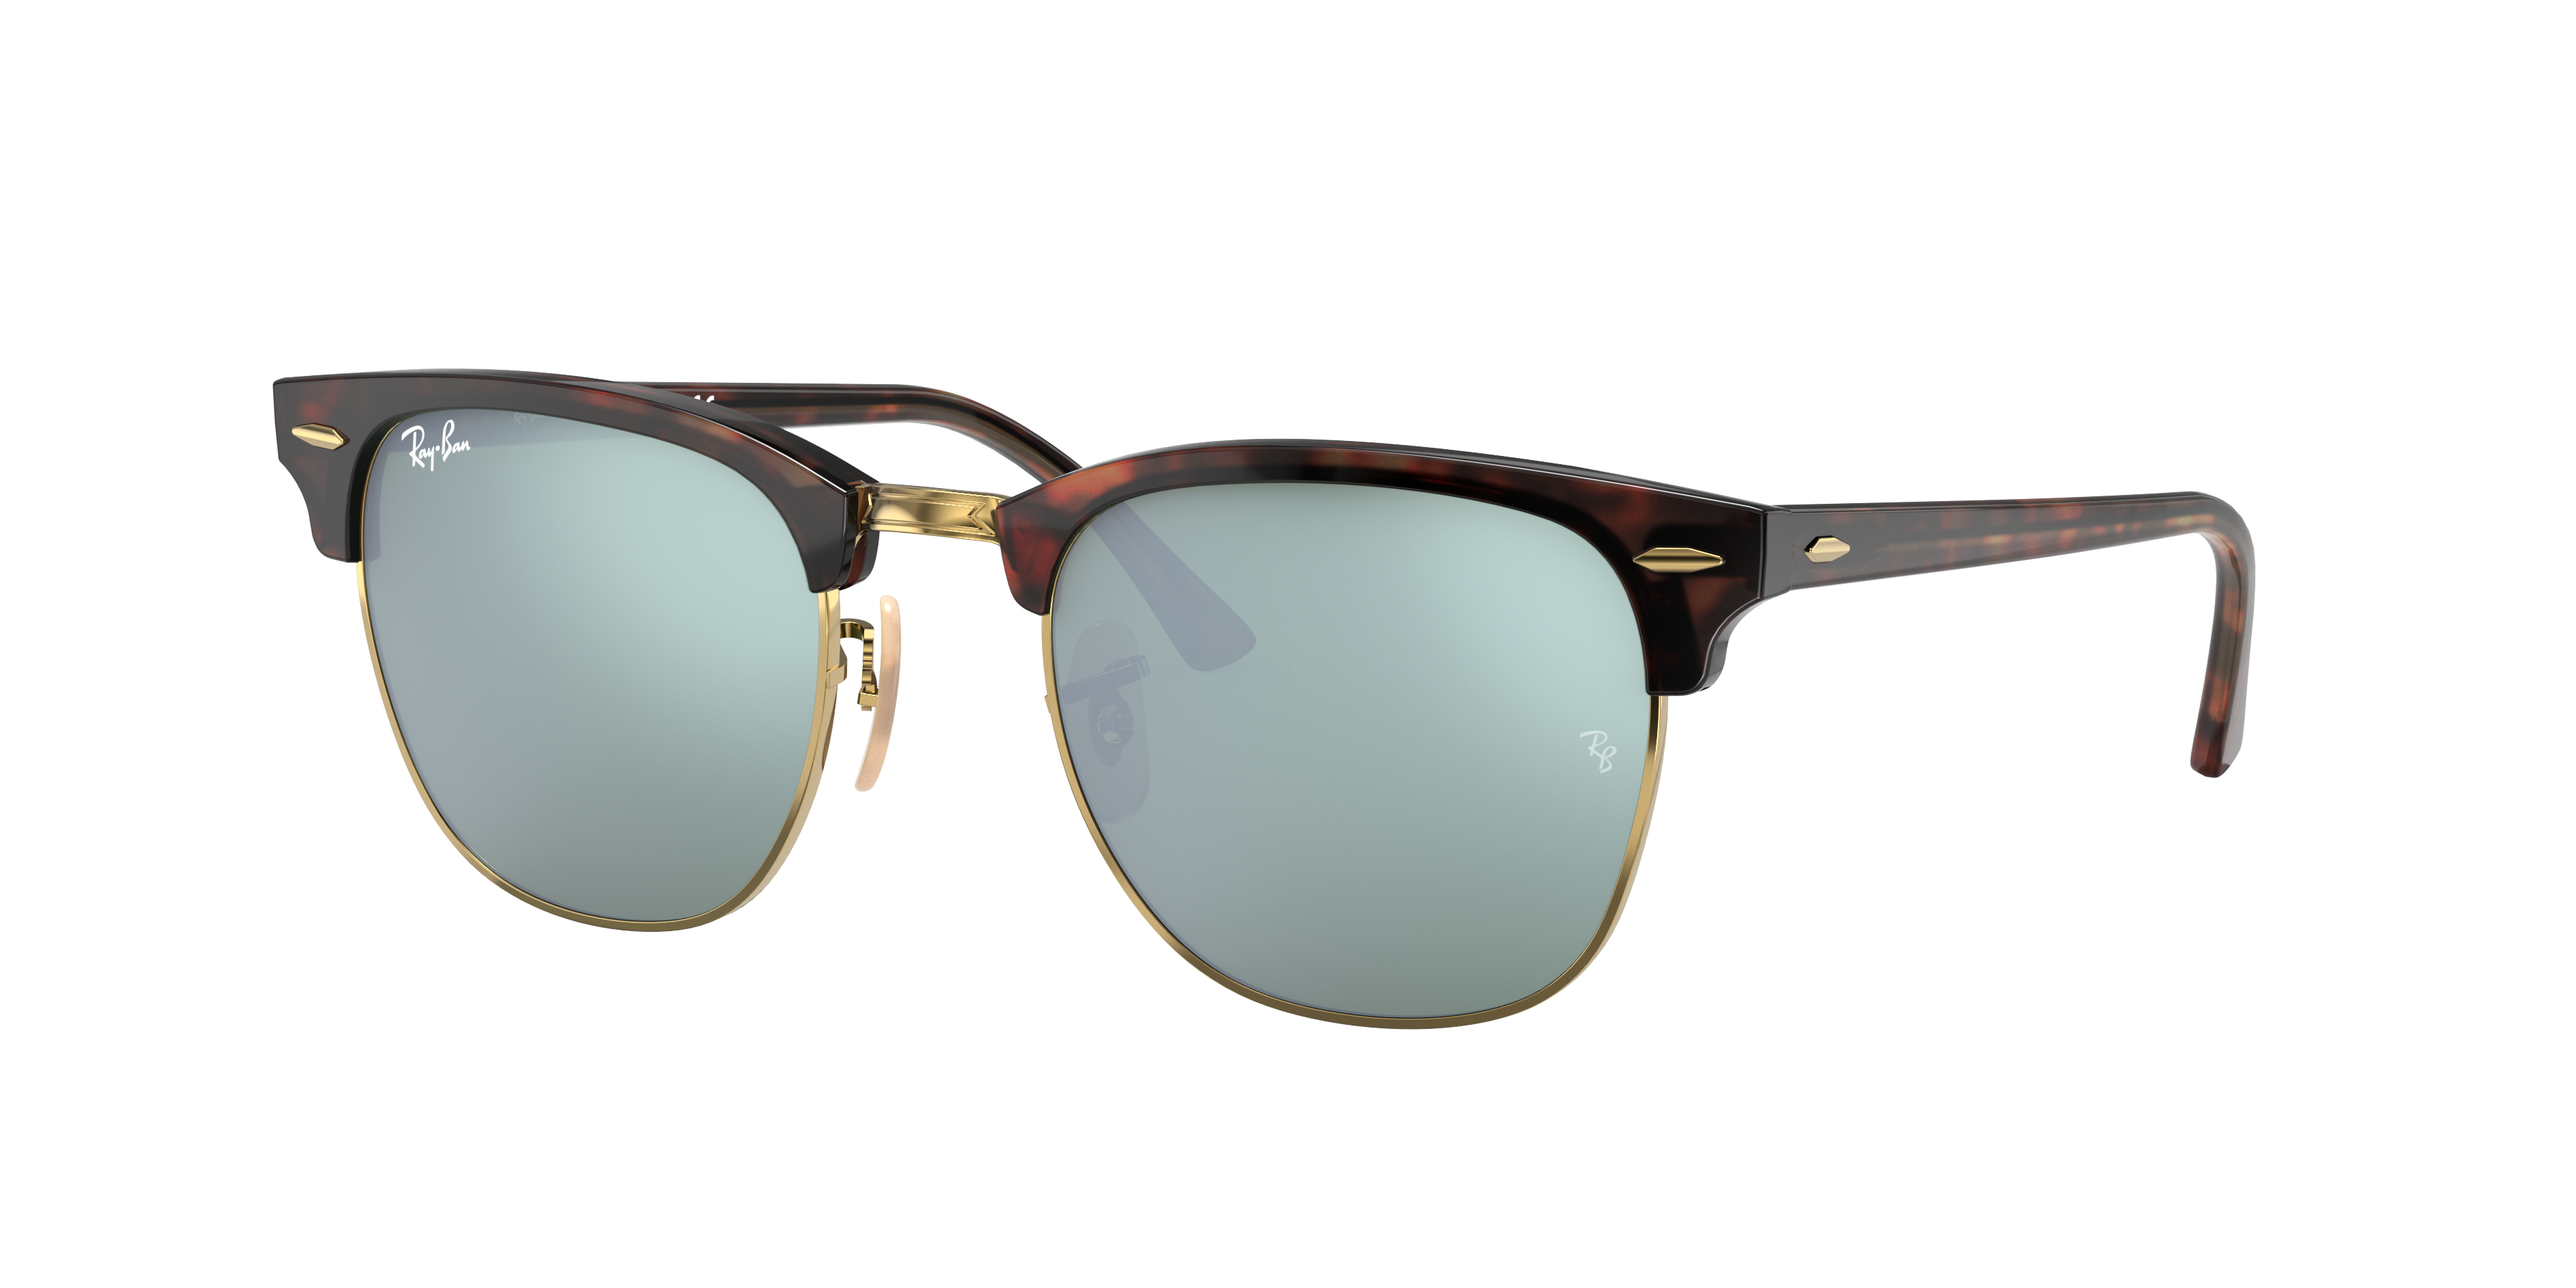 Ray-Ban 0RB3016 in Tortoise Sunglasses 